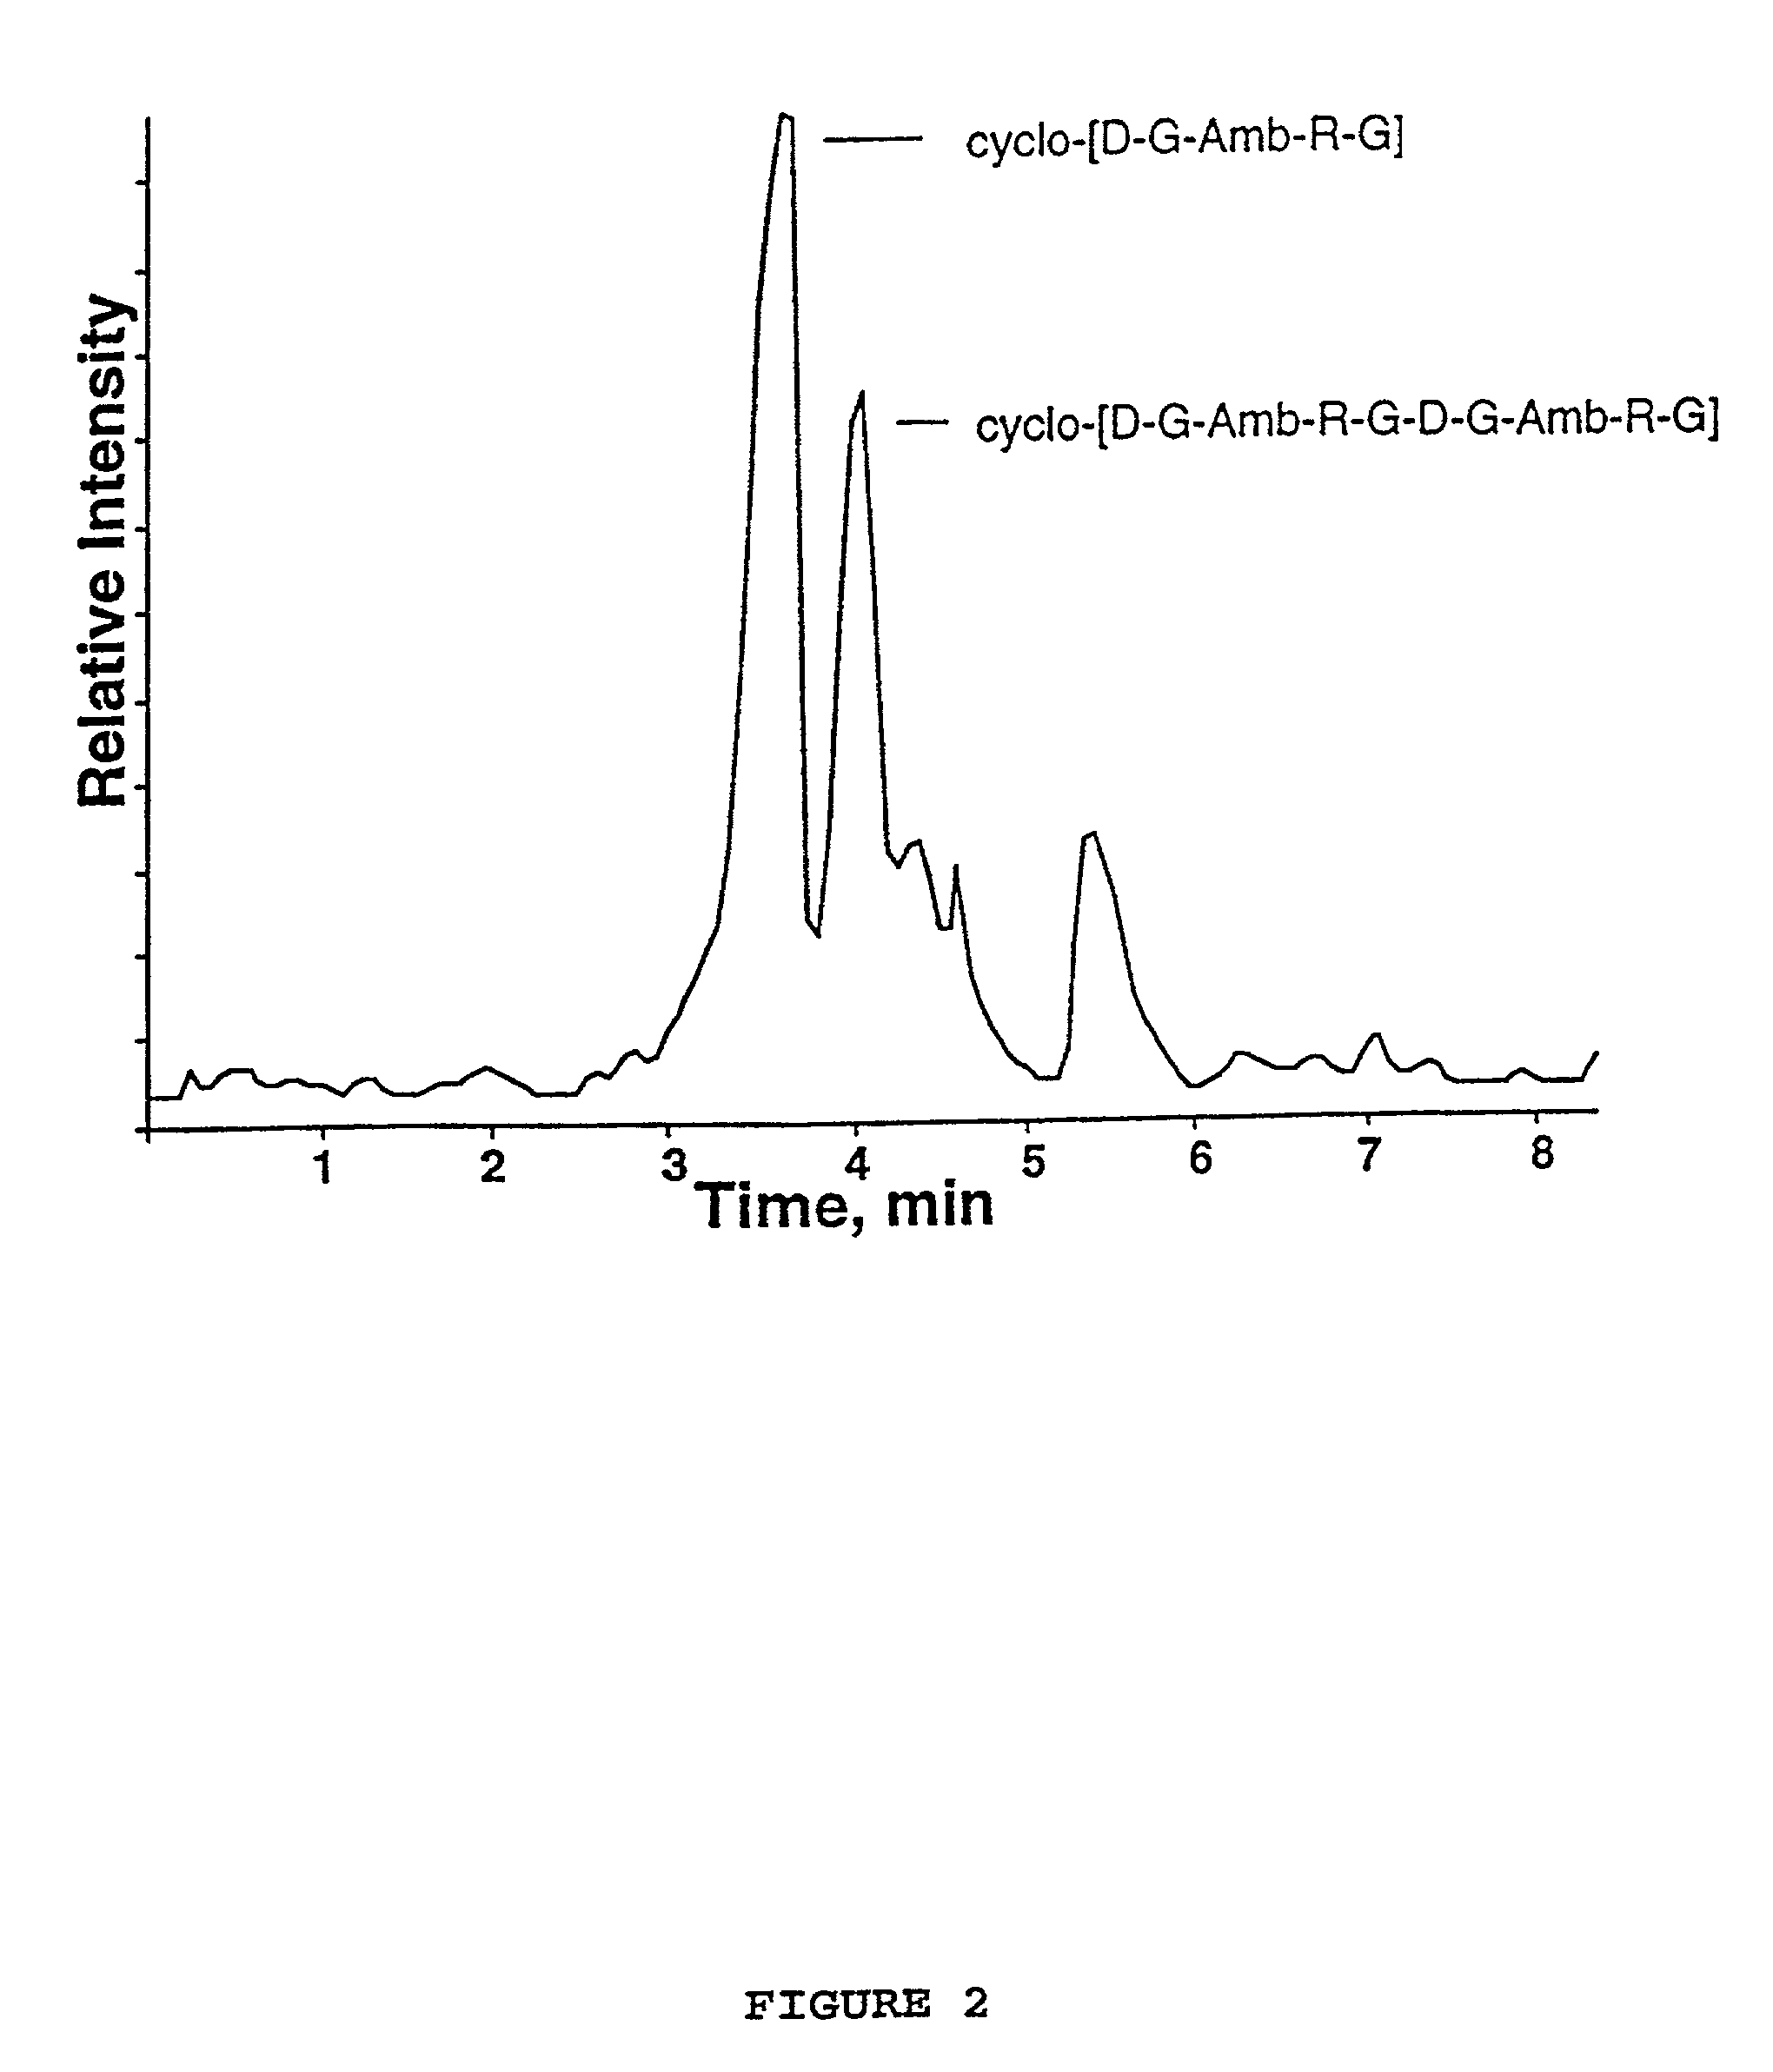 Synthesis of cyclic peptides